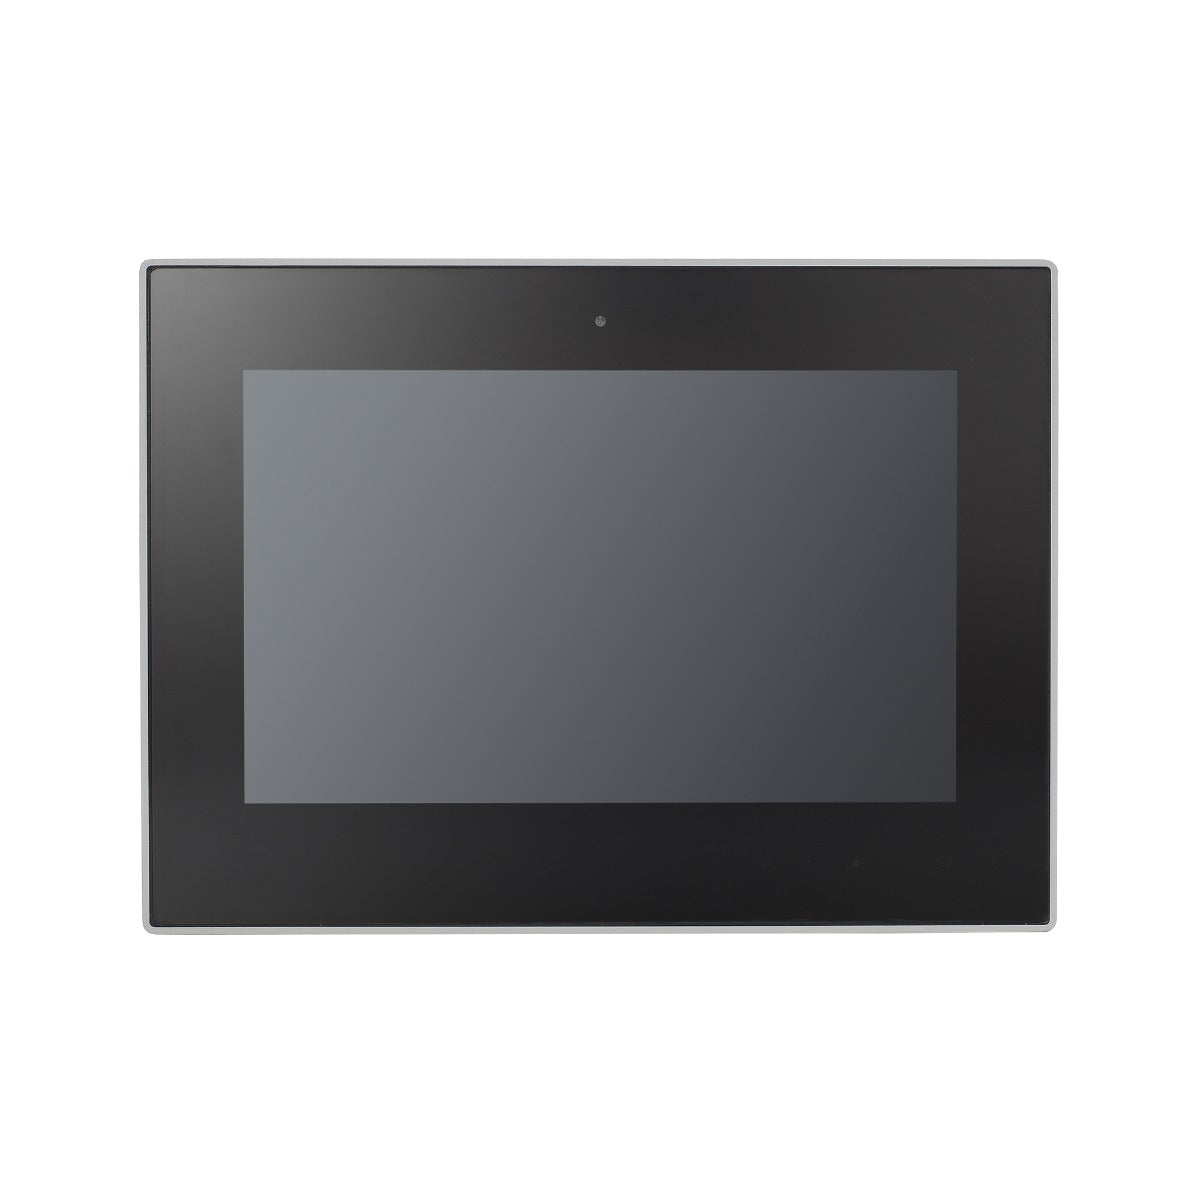 12.1 inch Touch Panel PC expc-f2120w